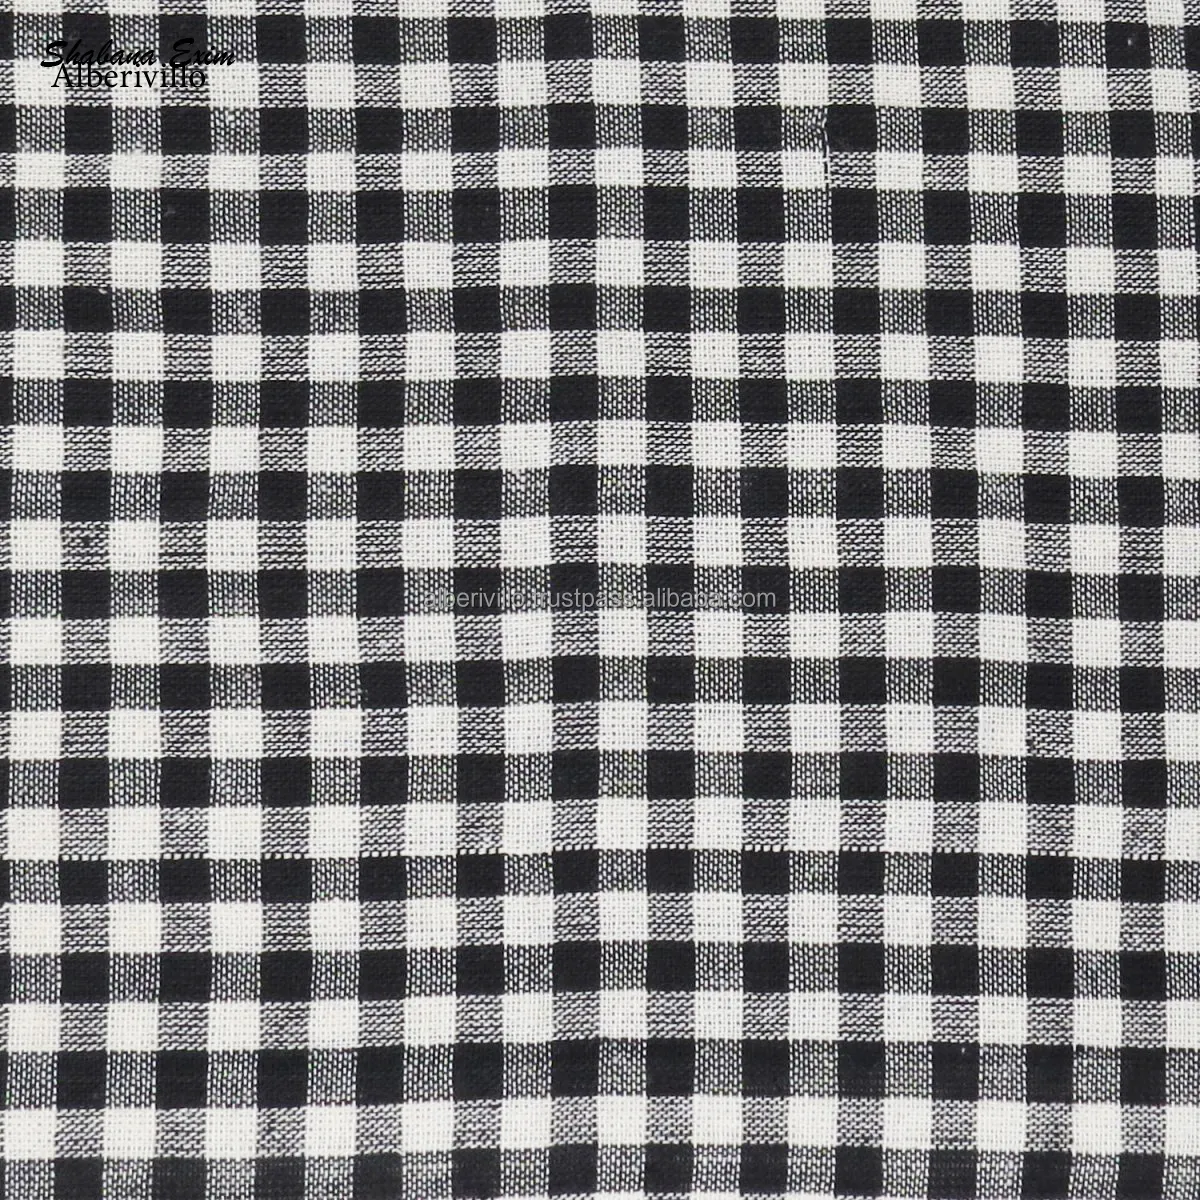 Black Checked Kitchen Napkin Fabric Order Hot Selling High Quality Cotton Woven Yarn-Dyed Plaid Fabric for Shirt